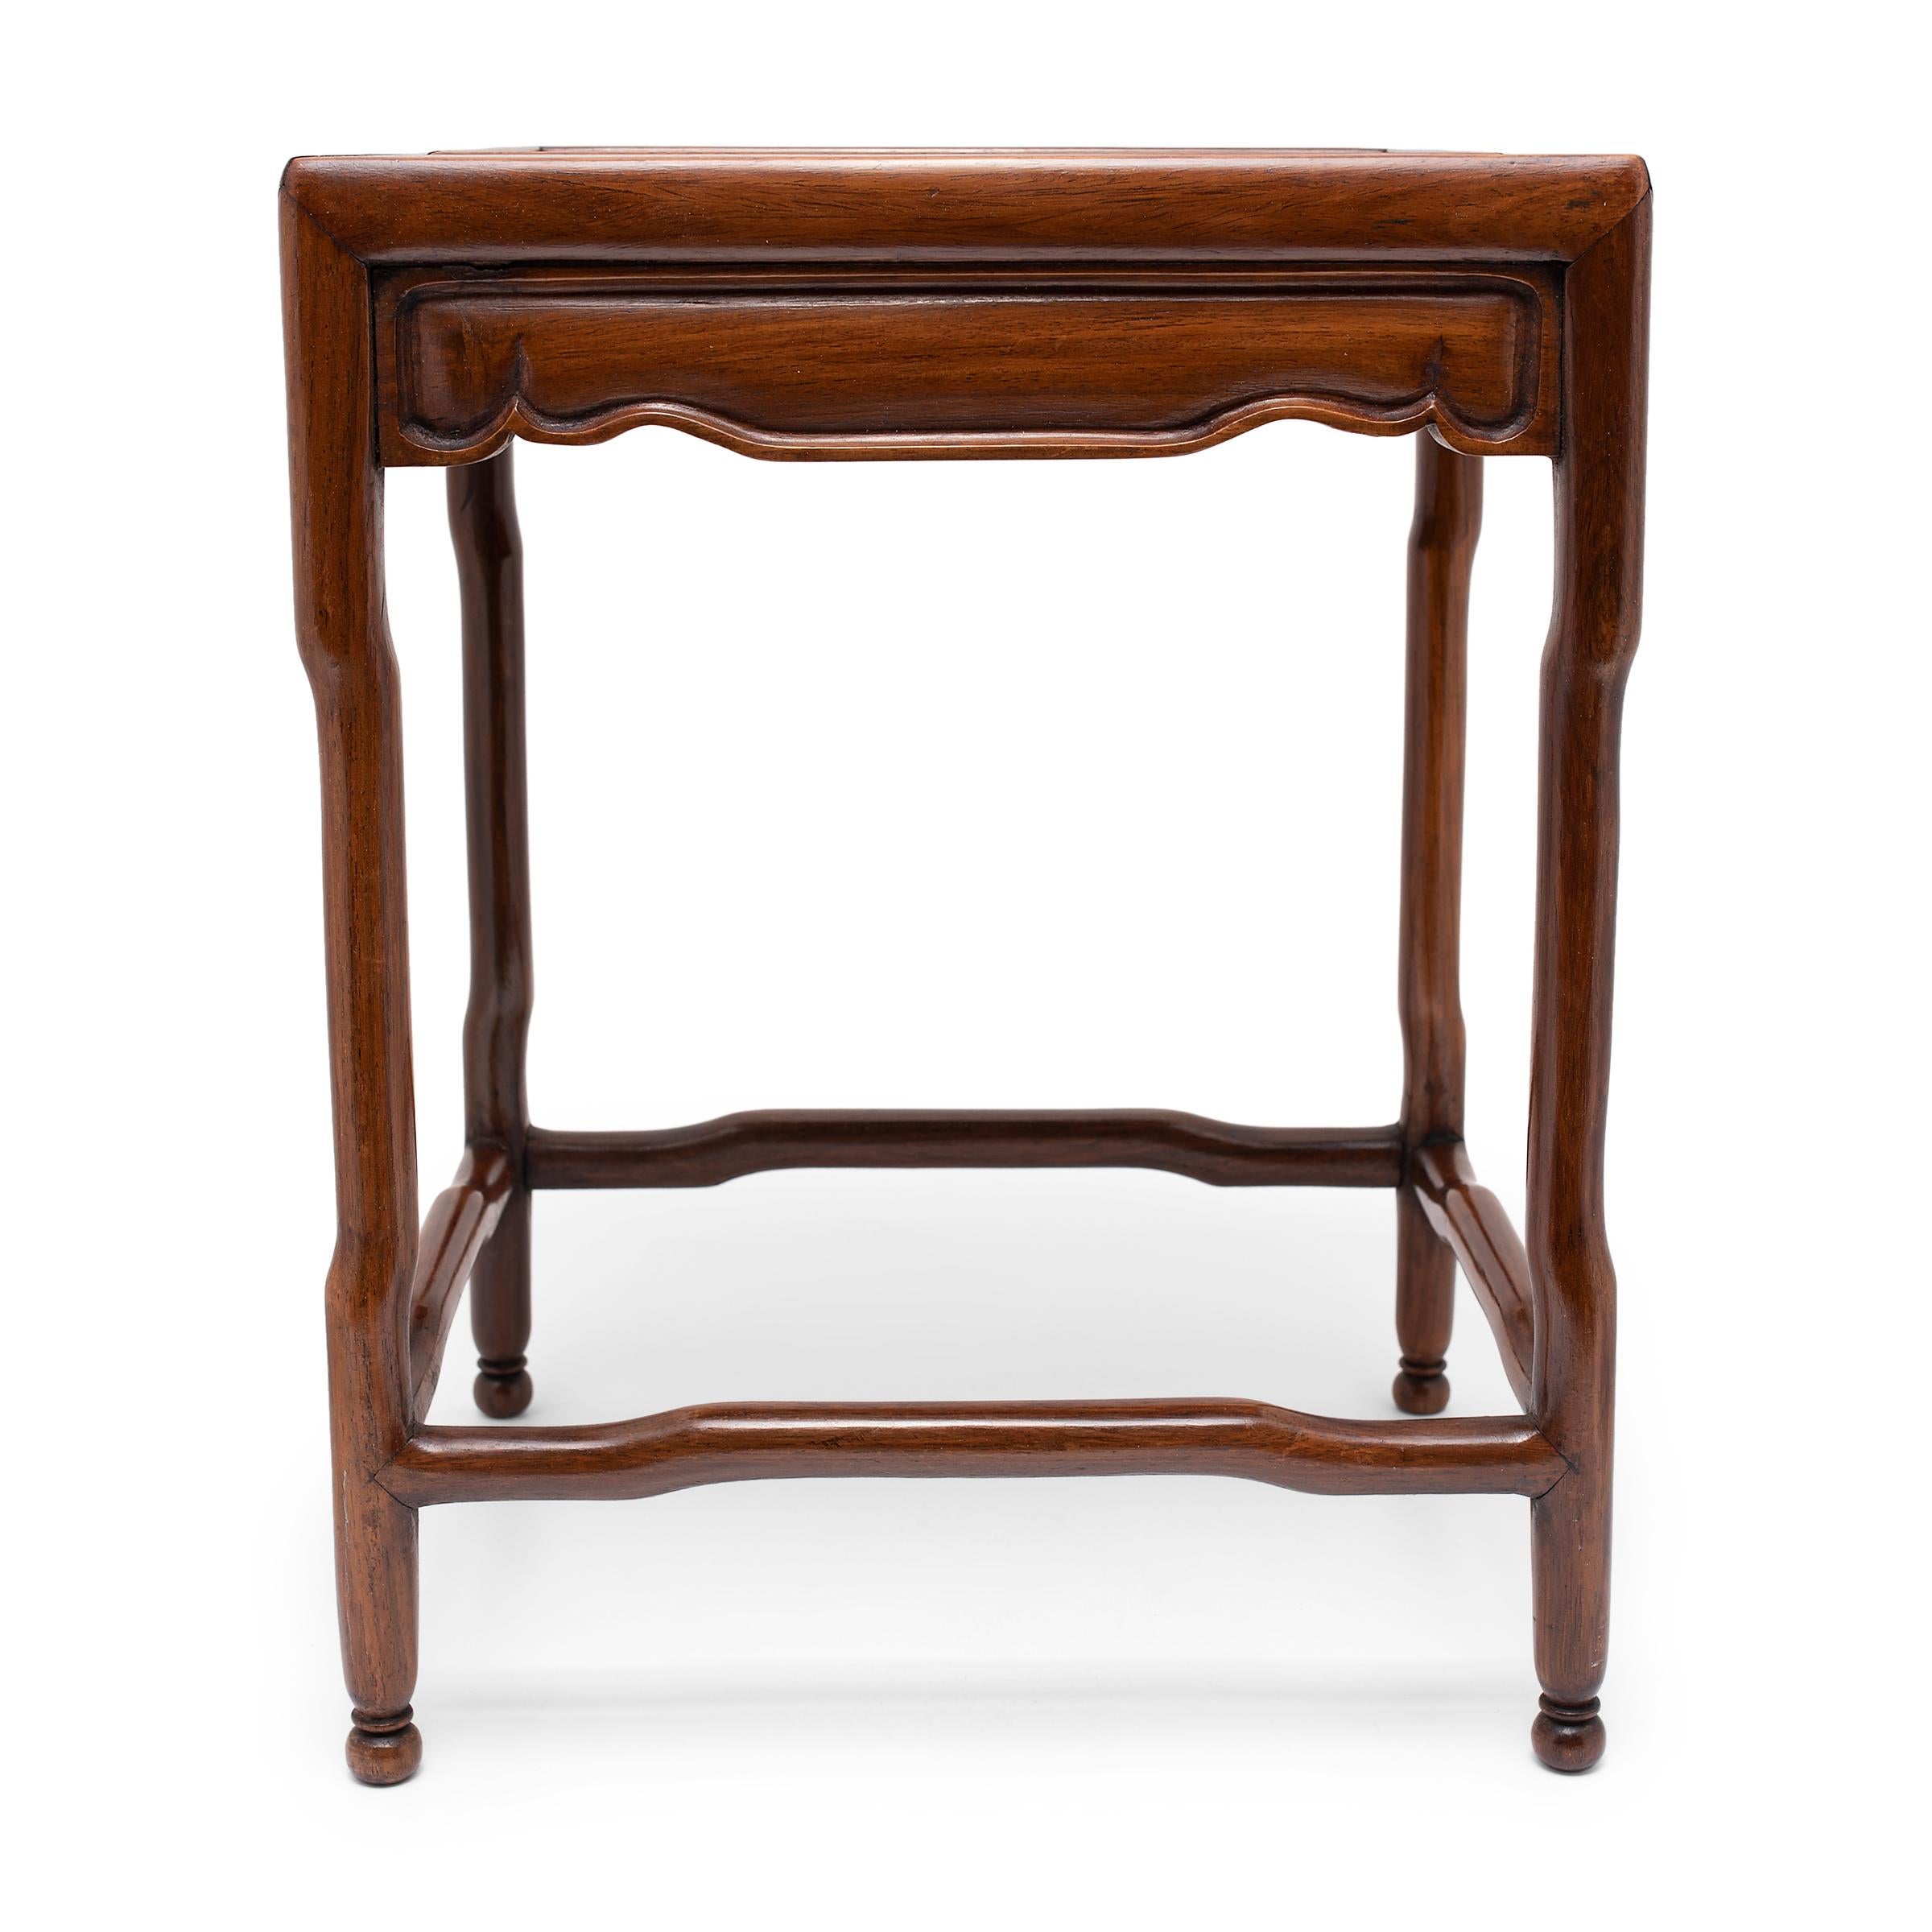 Crafted of a beautiful dense hardwood, this petite table from the late 19th century is designed for displaying precious objects, such as fine porcelain, sculptures, or incense burners. The pedestal has a rectangular floating panel top and stands on